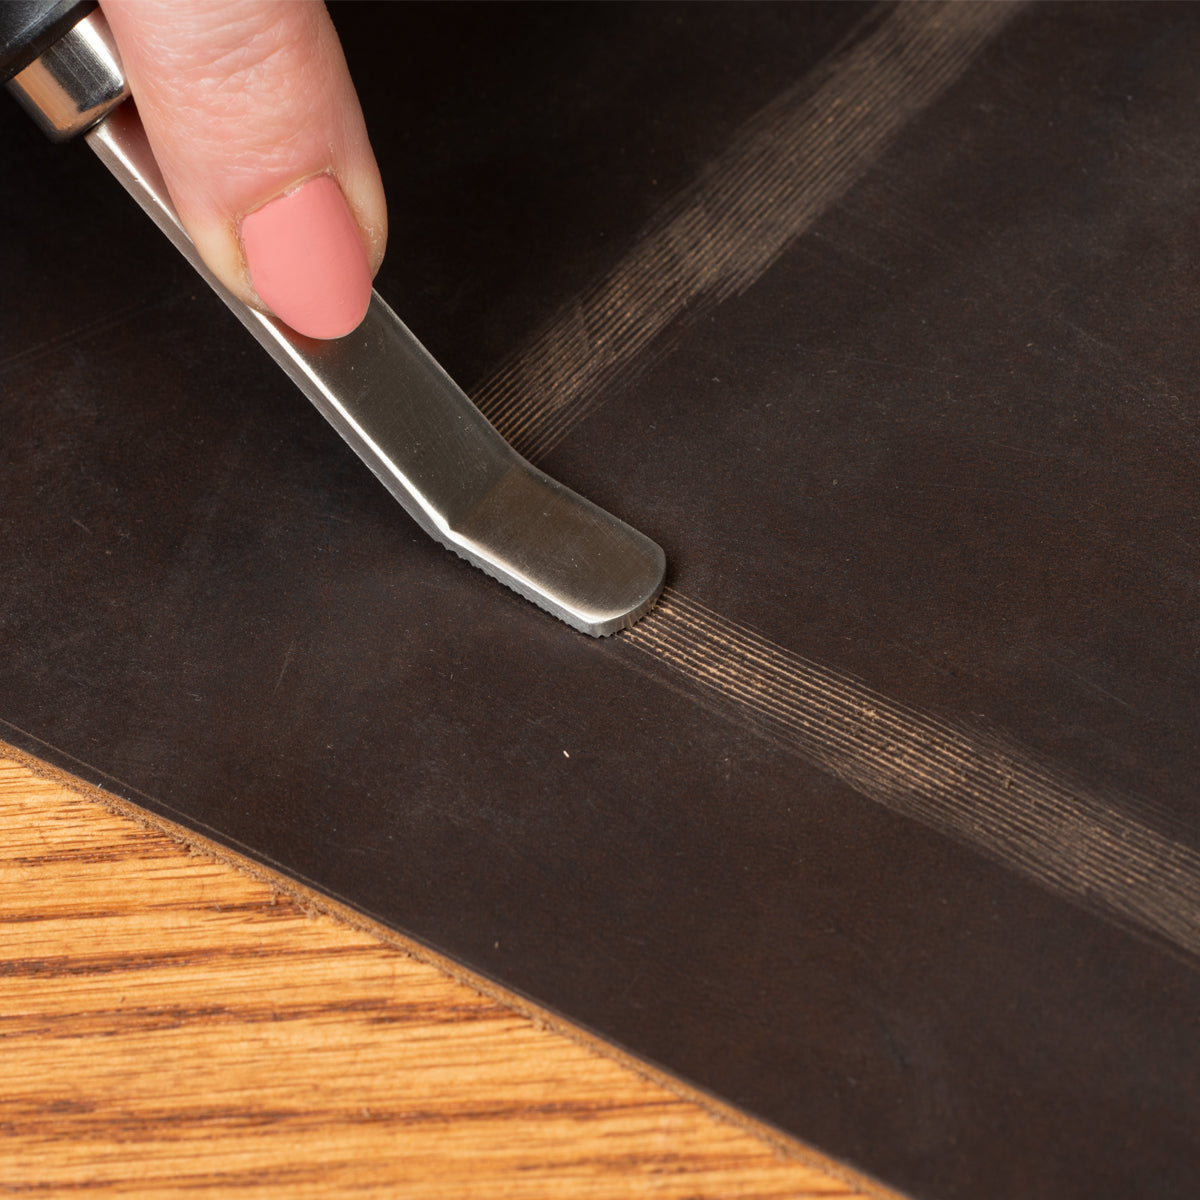 Olfa® Cushion Grip Knife with Blades - Weaver Leather Supply